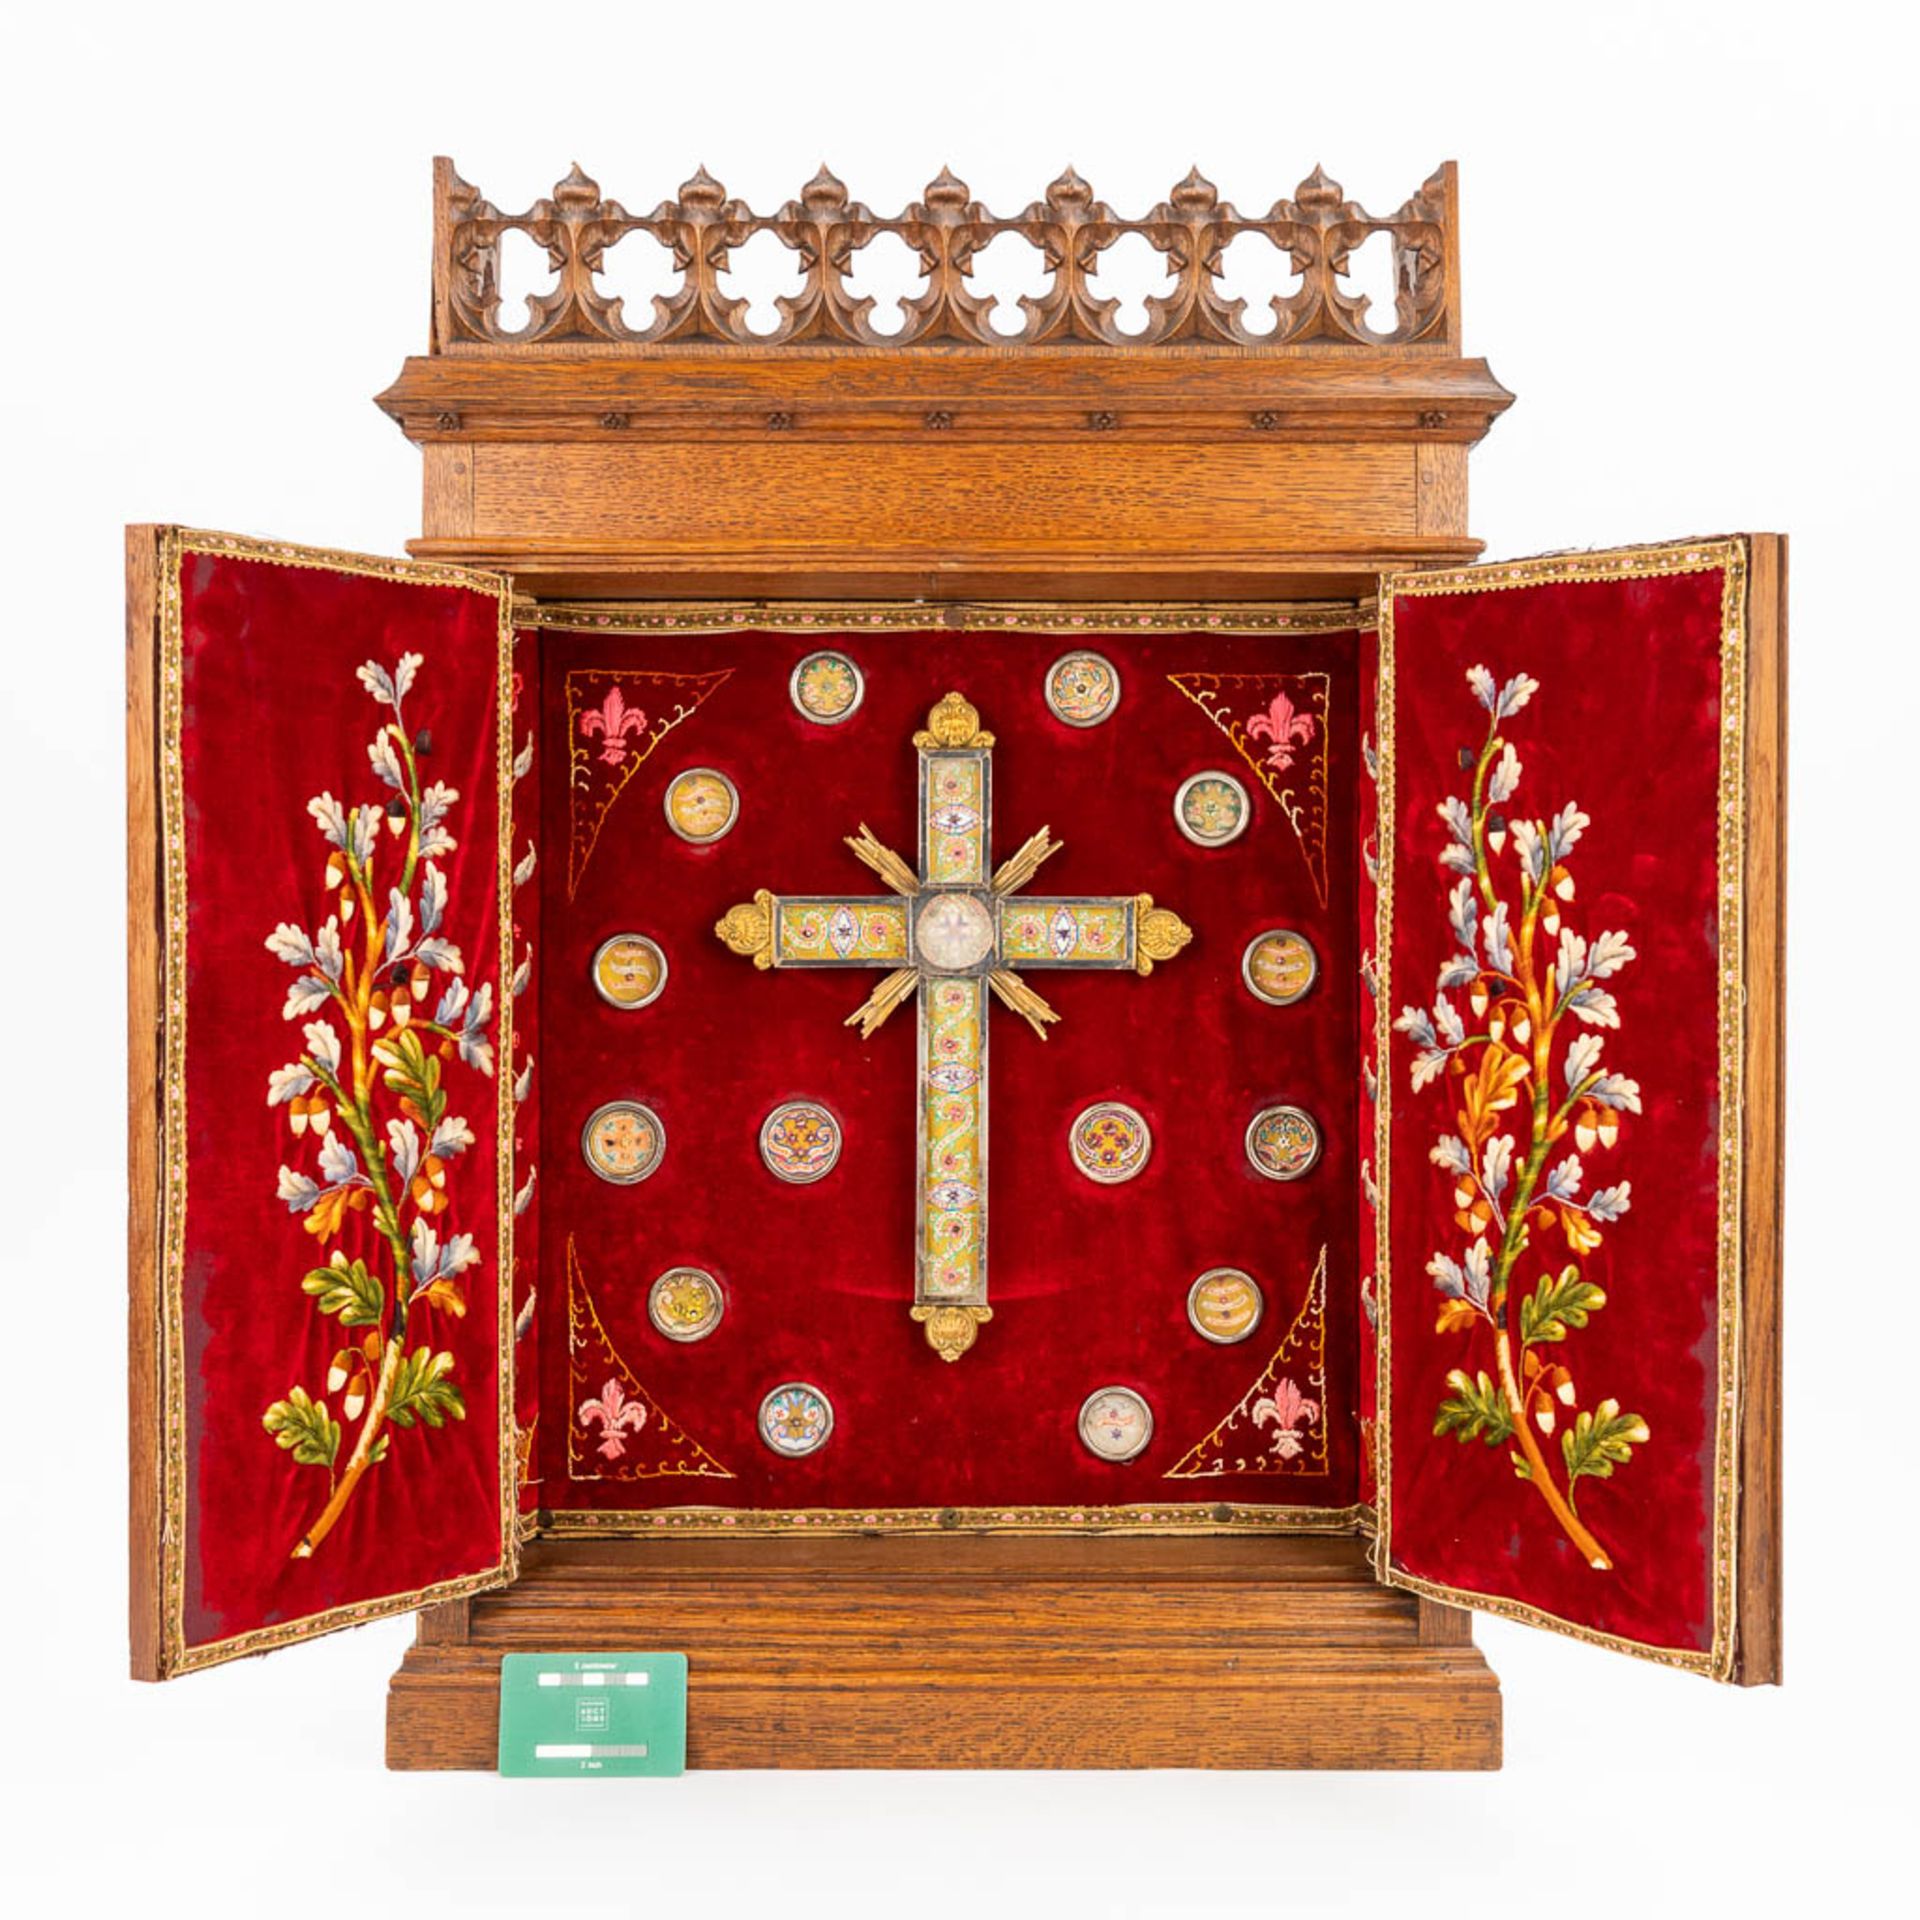 An antique reliquary box with relics a relic crucifix and embroidery. (L:13 x W:52 x H:75 cm) - Image 9 of 23